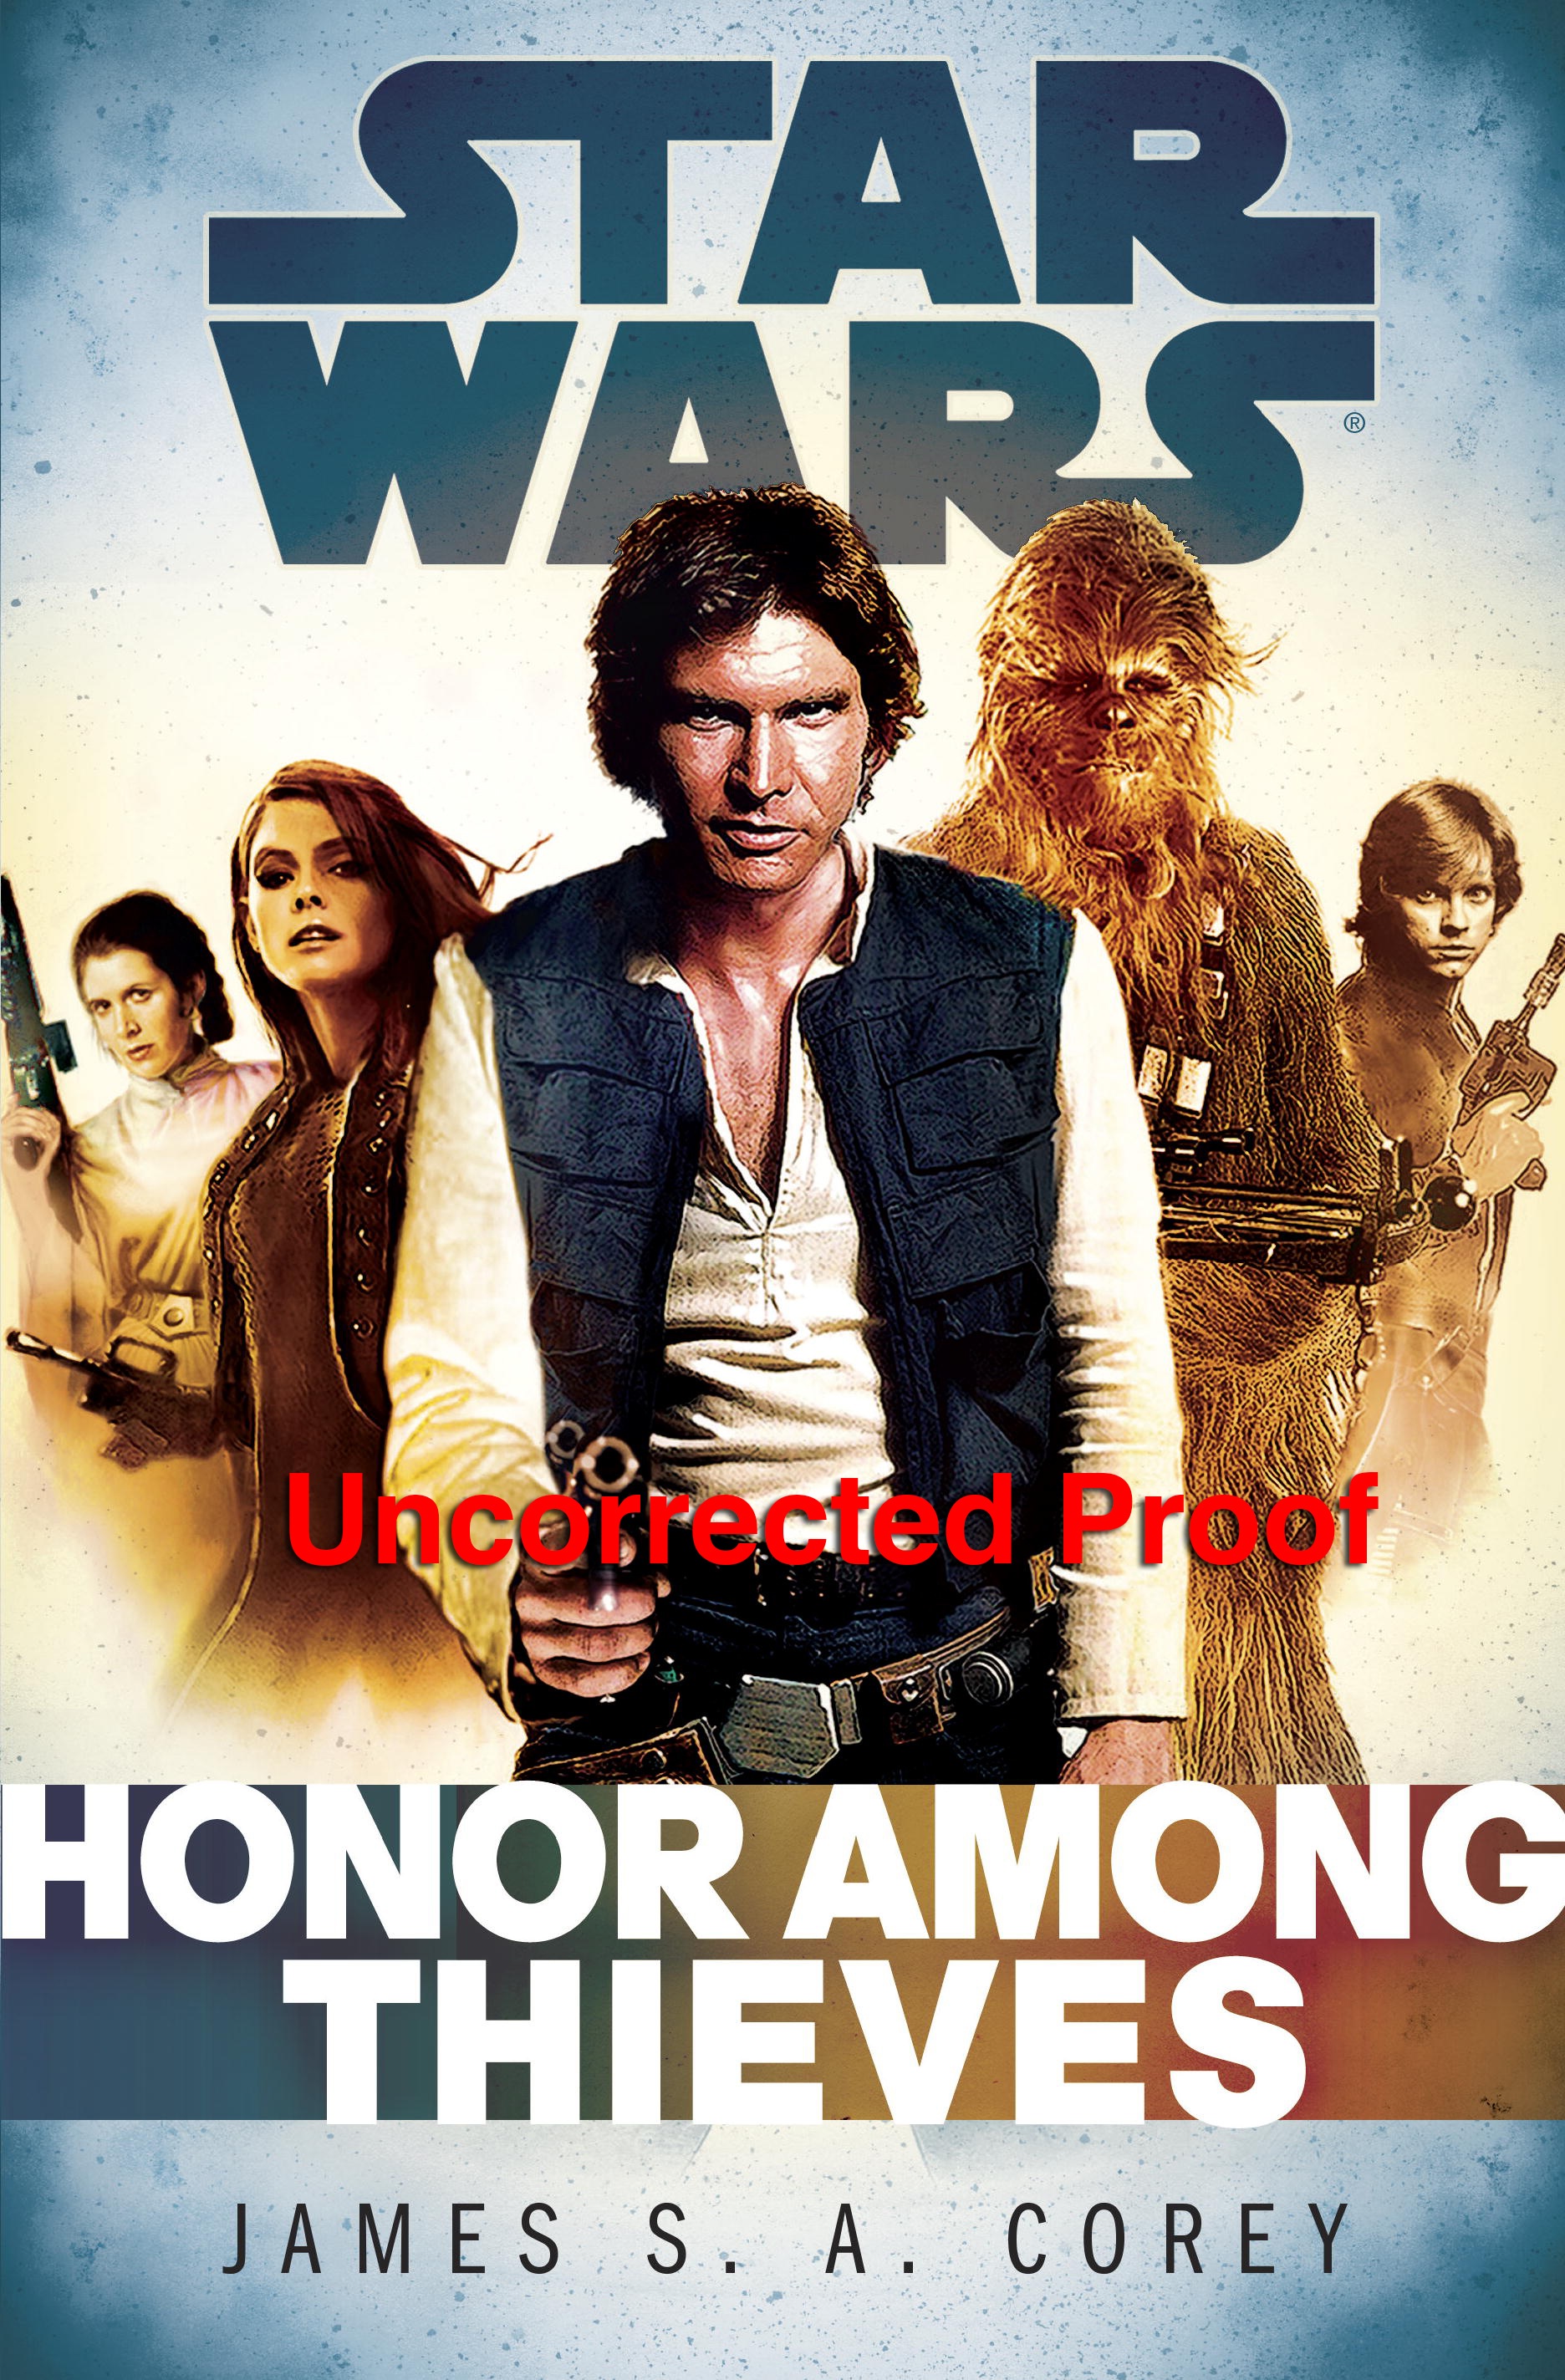 Honor Among Thieves: Star Wars (Empire and Rebellion) by James S.A. Corey